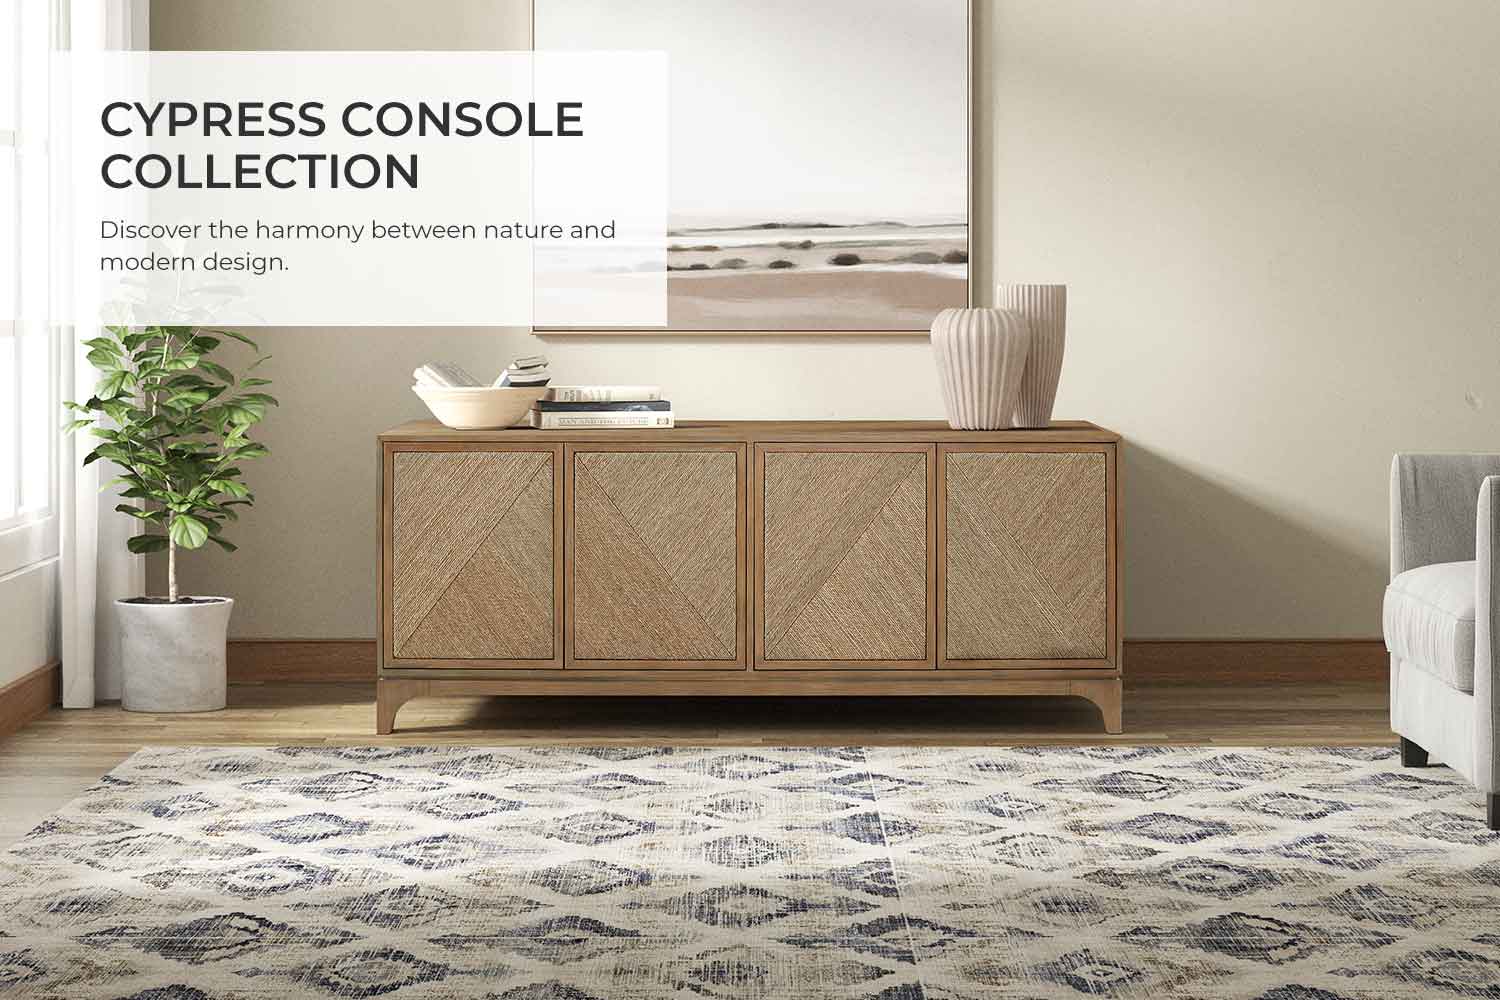 Cypress Console Collection Header Image